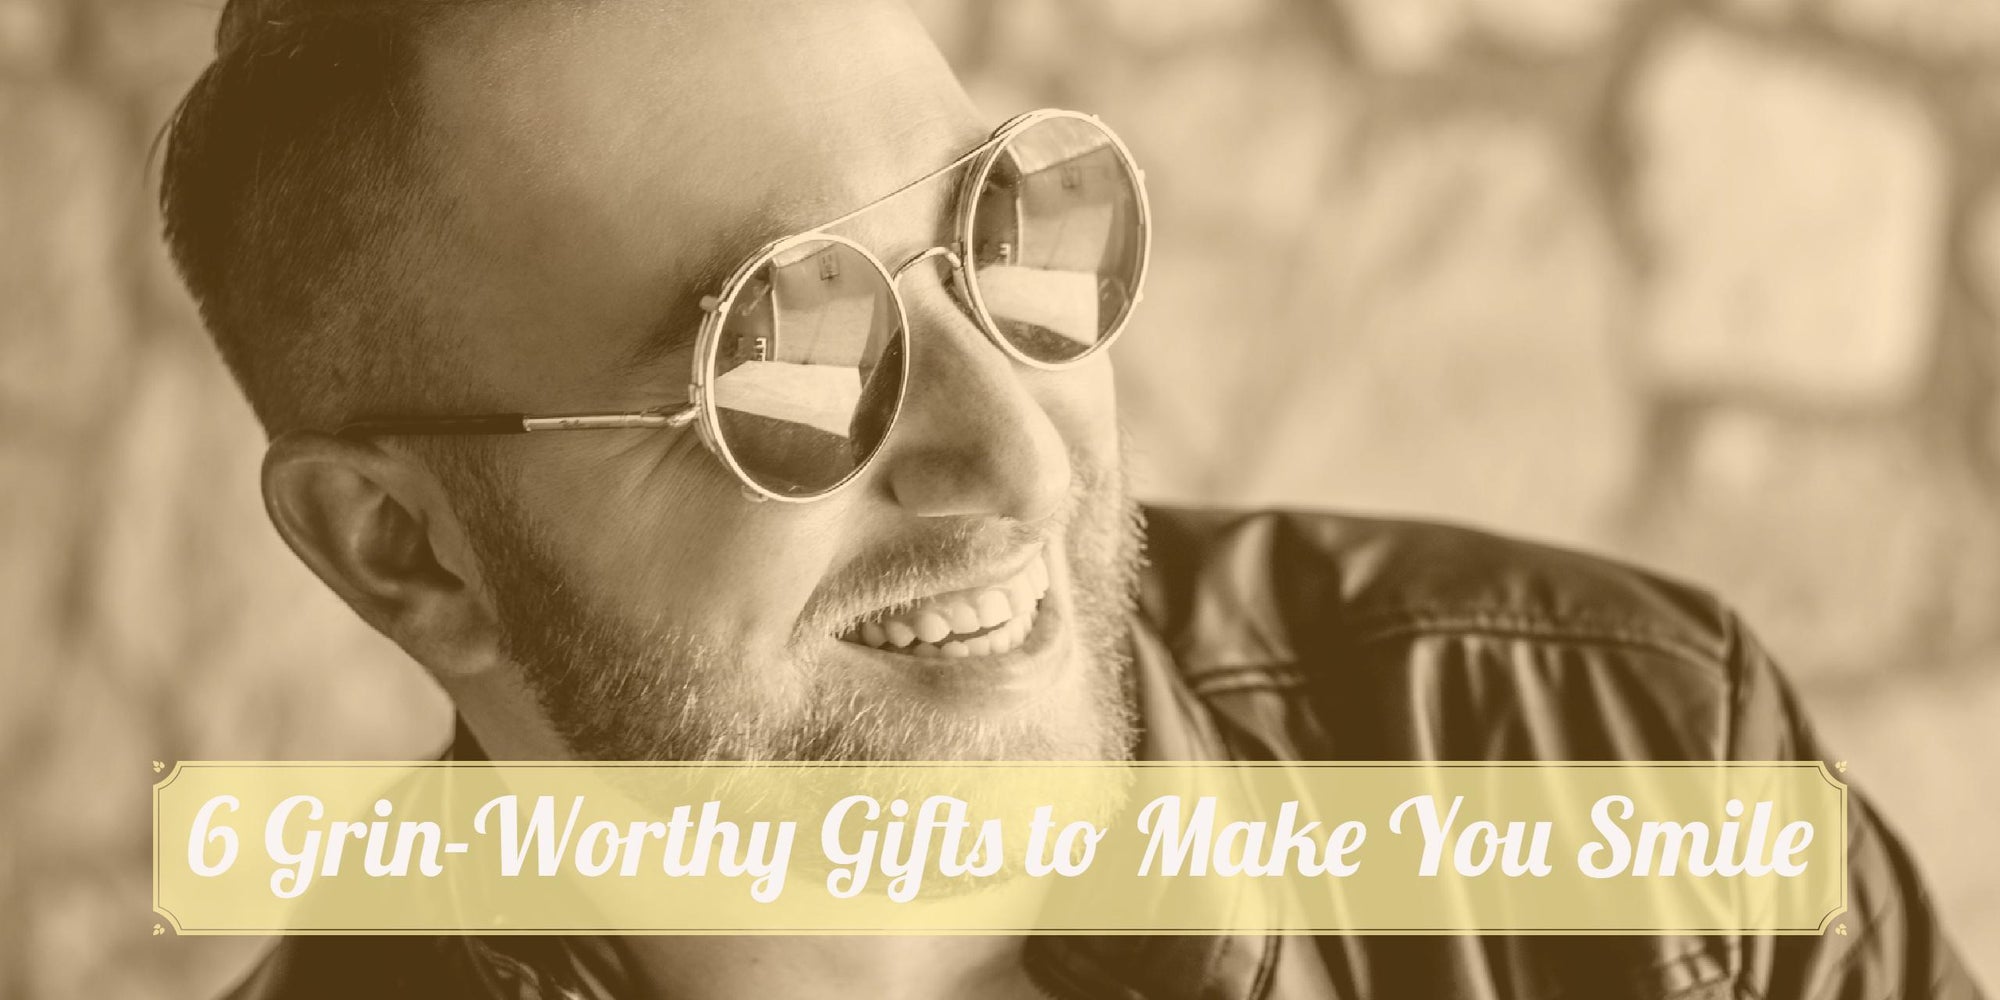 Smile! 6 Grin-Worthy Gifts